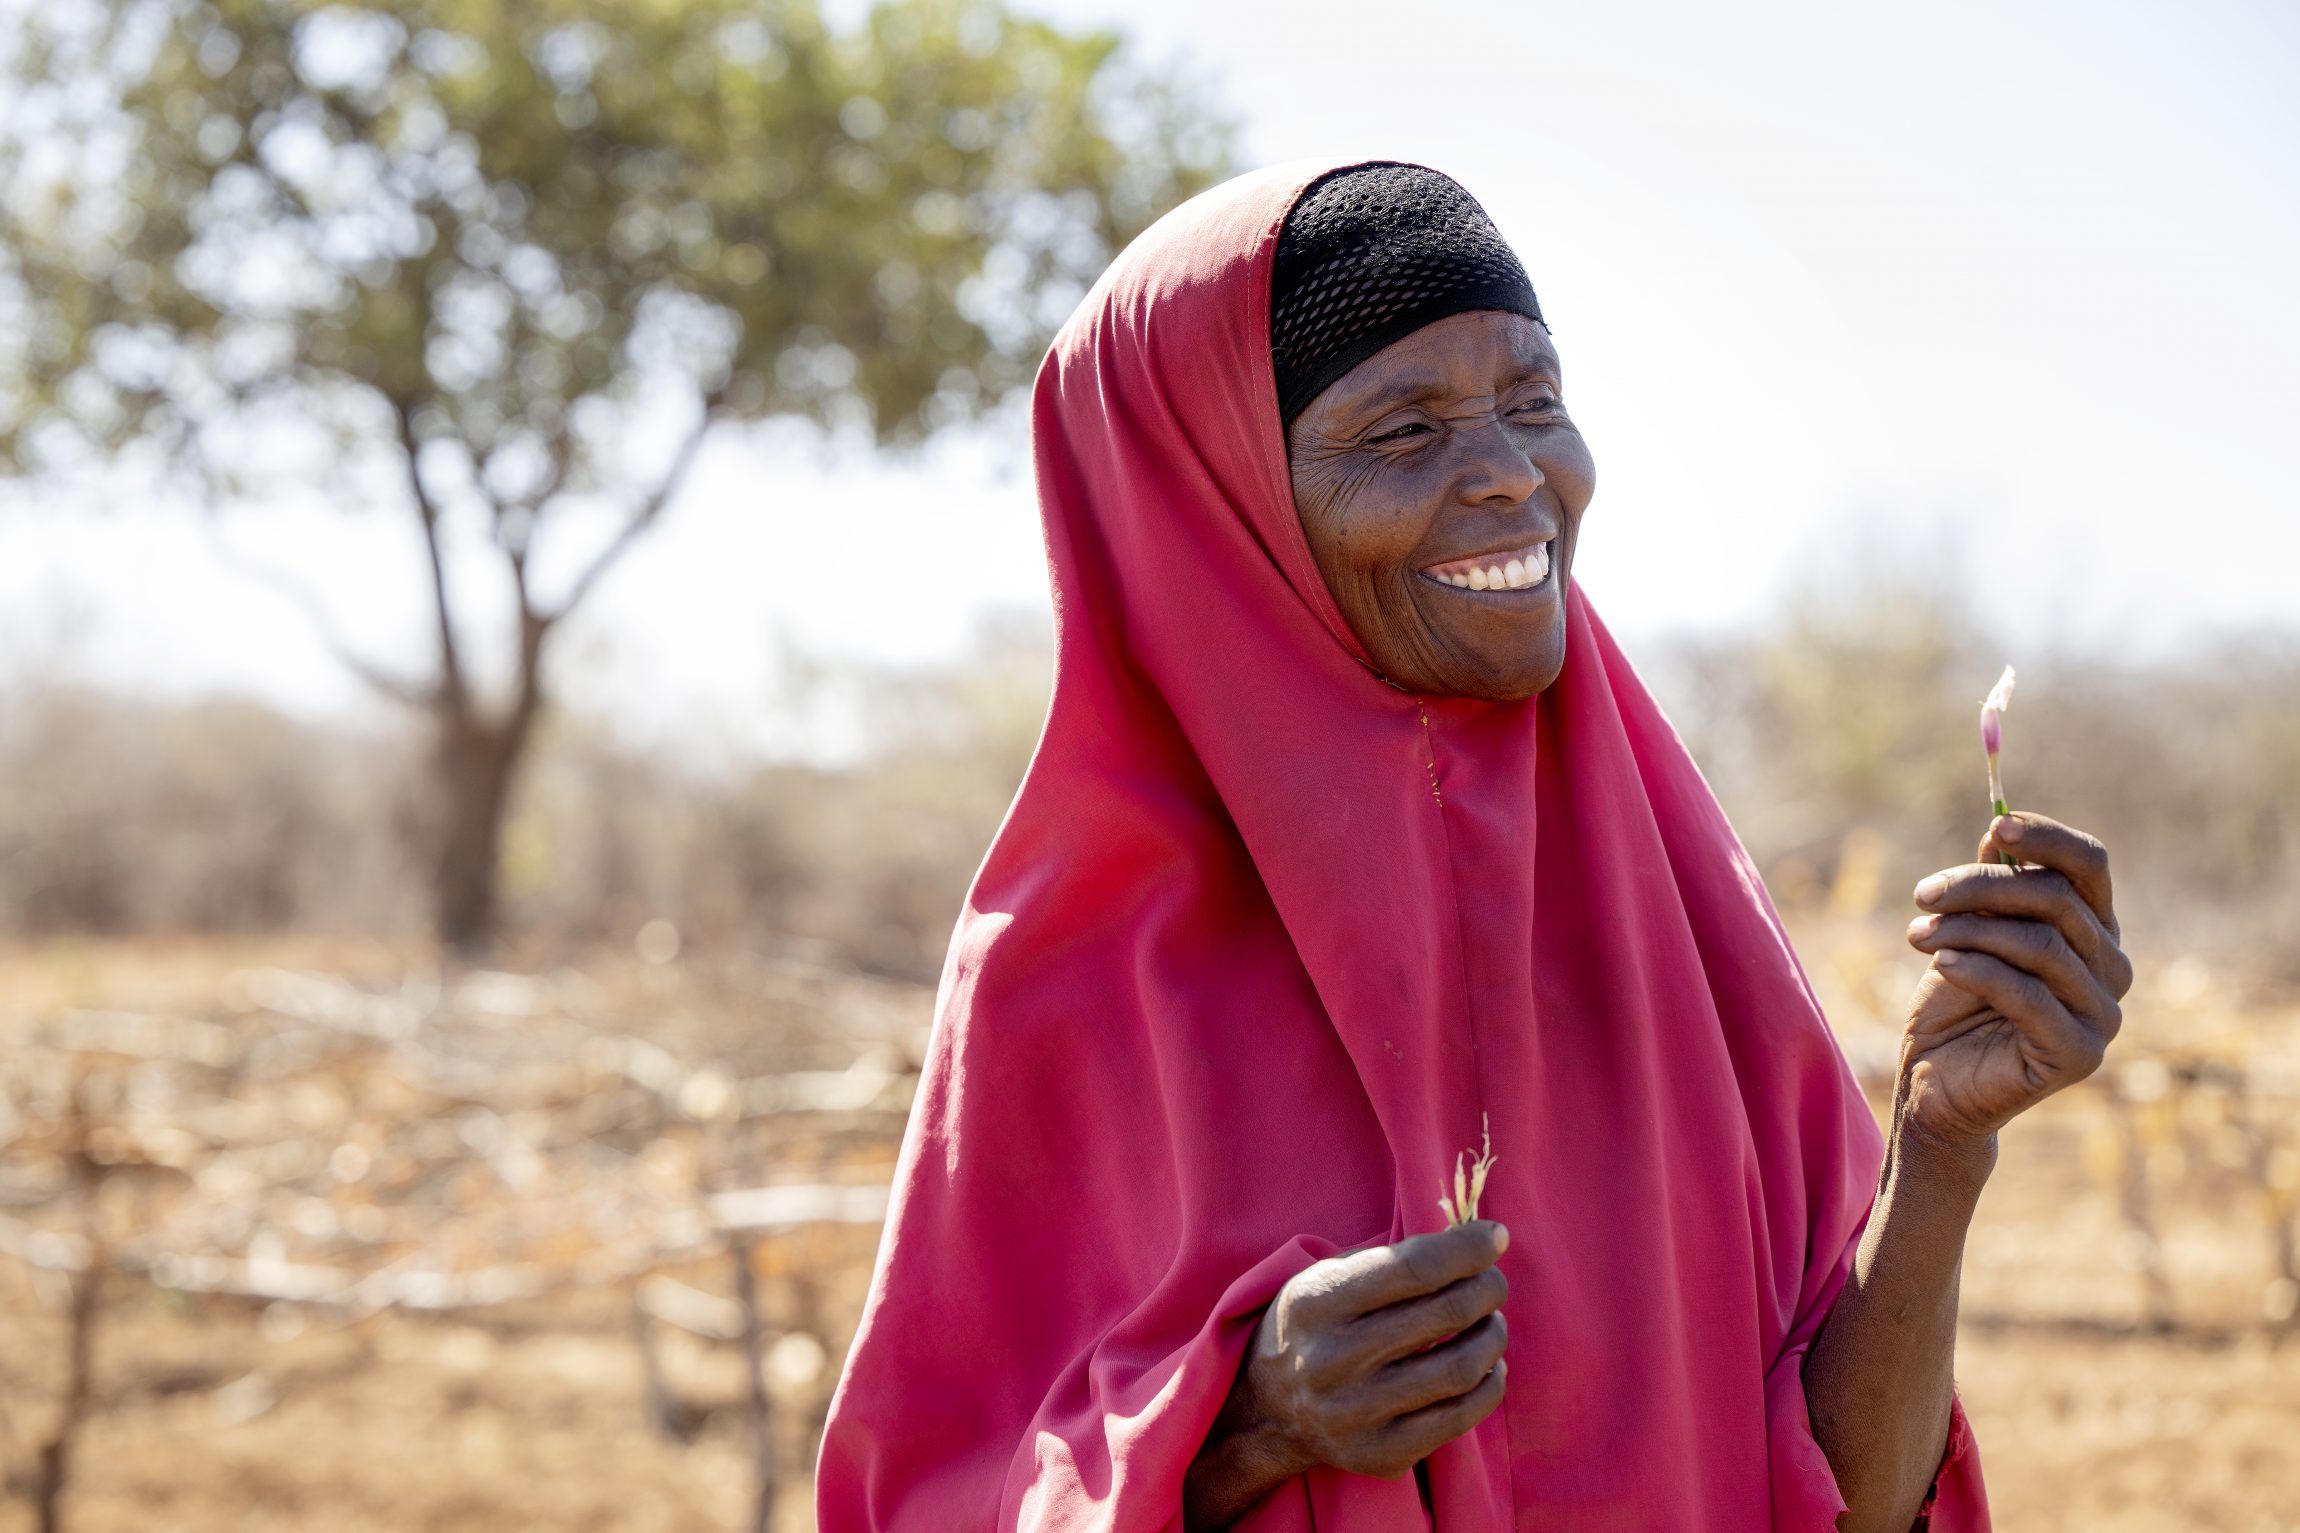 The woman Rabla from Ethiopia is happy. She holds af sprout in her hand.